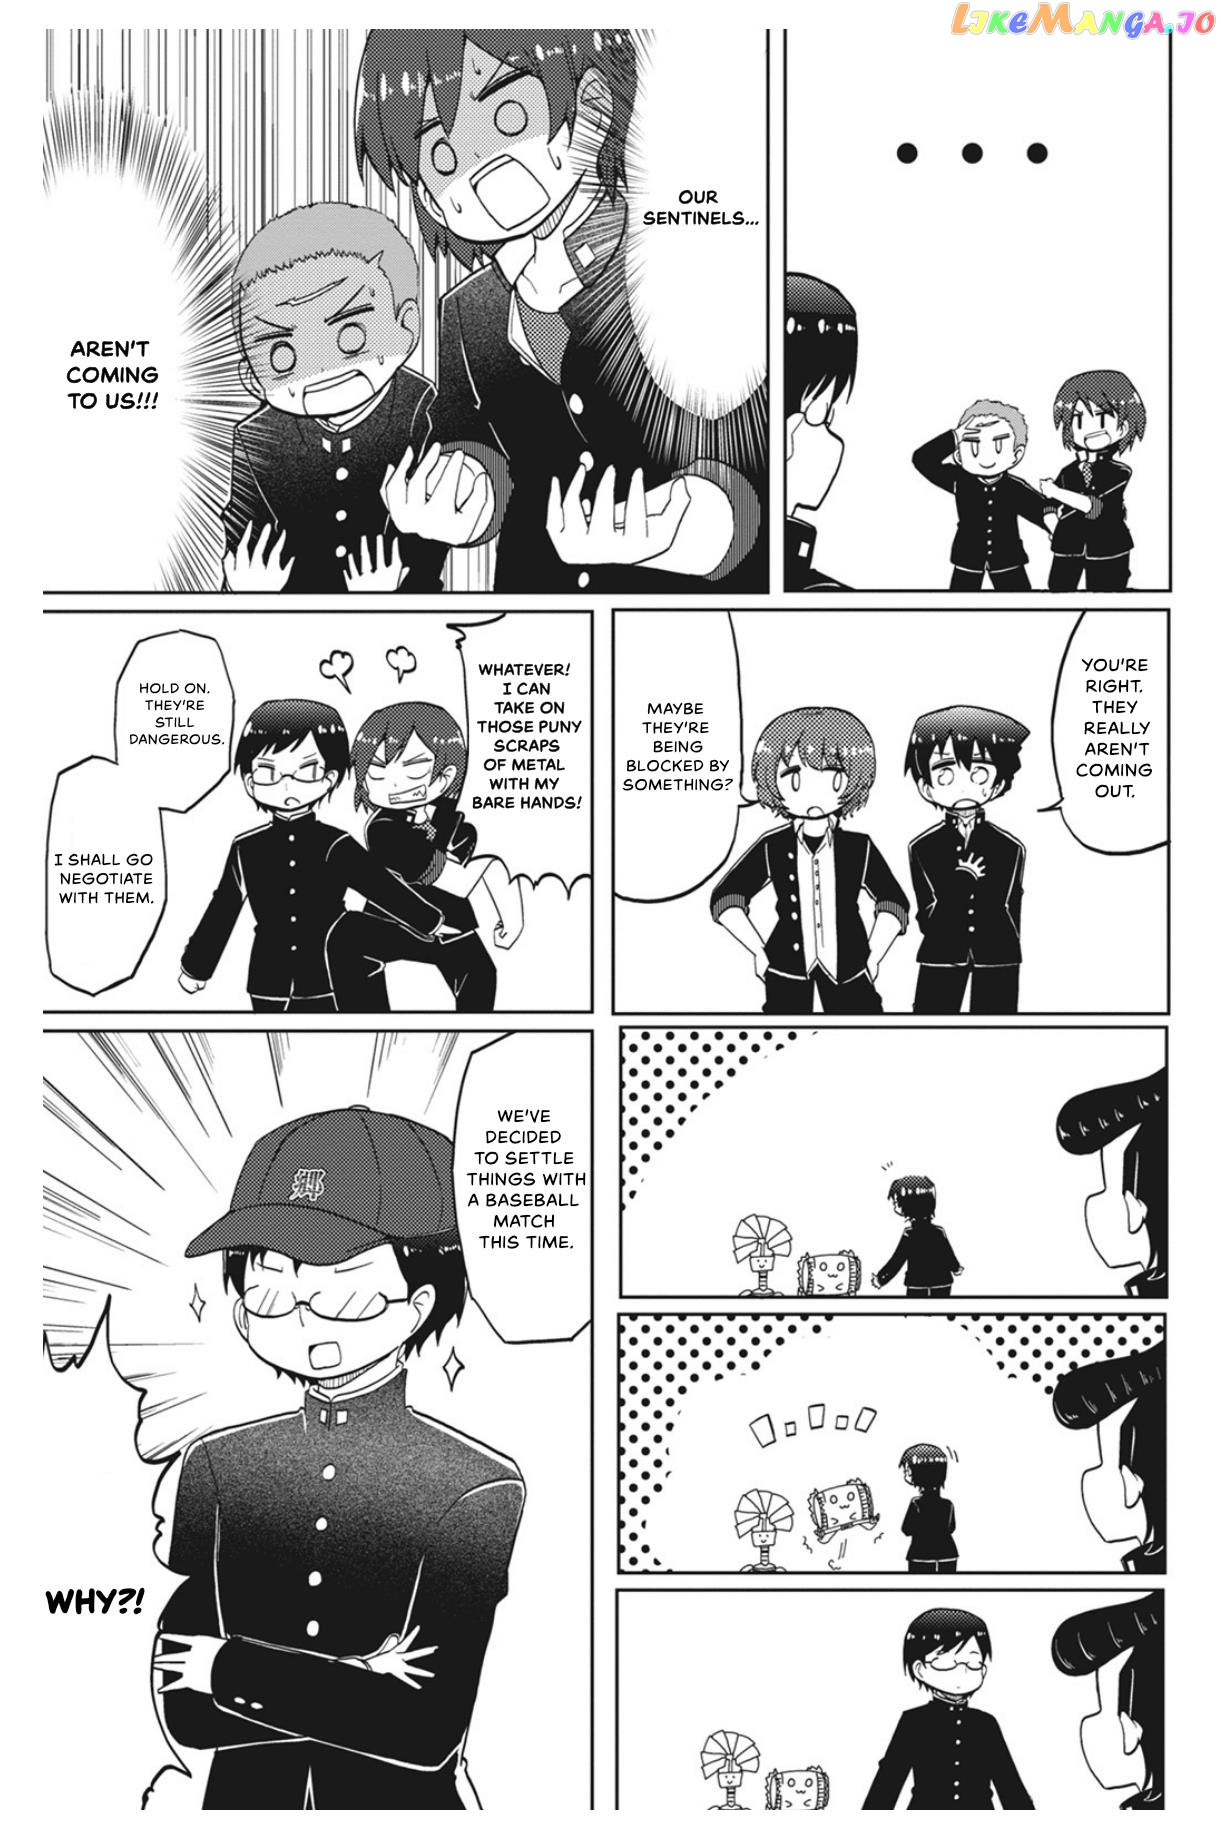 4-Panel 13 Sentinels: Aegis Rim This Is Sector X Chapter 10.5 - page 3